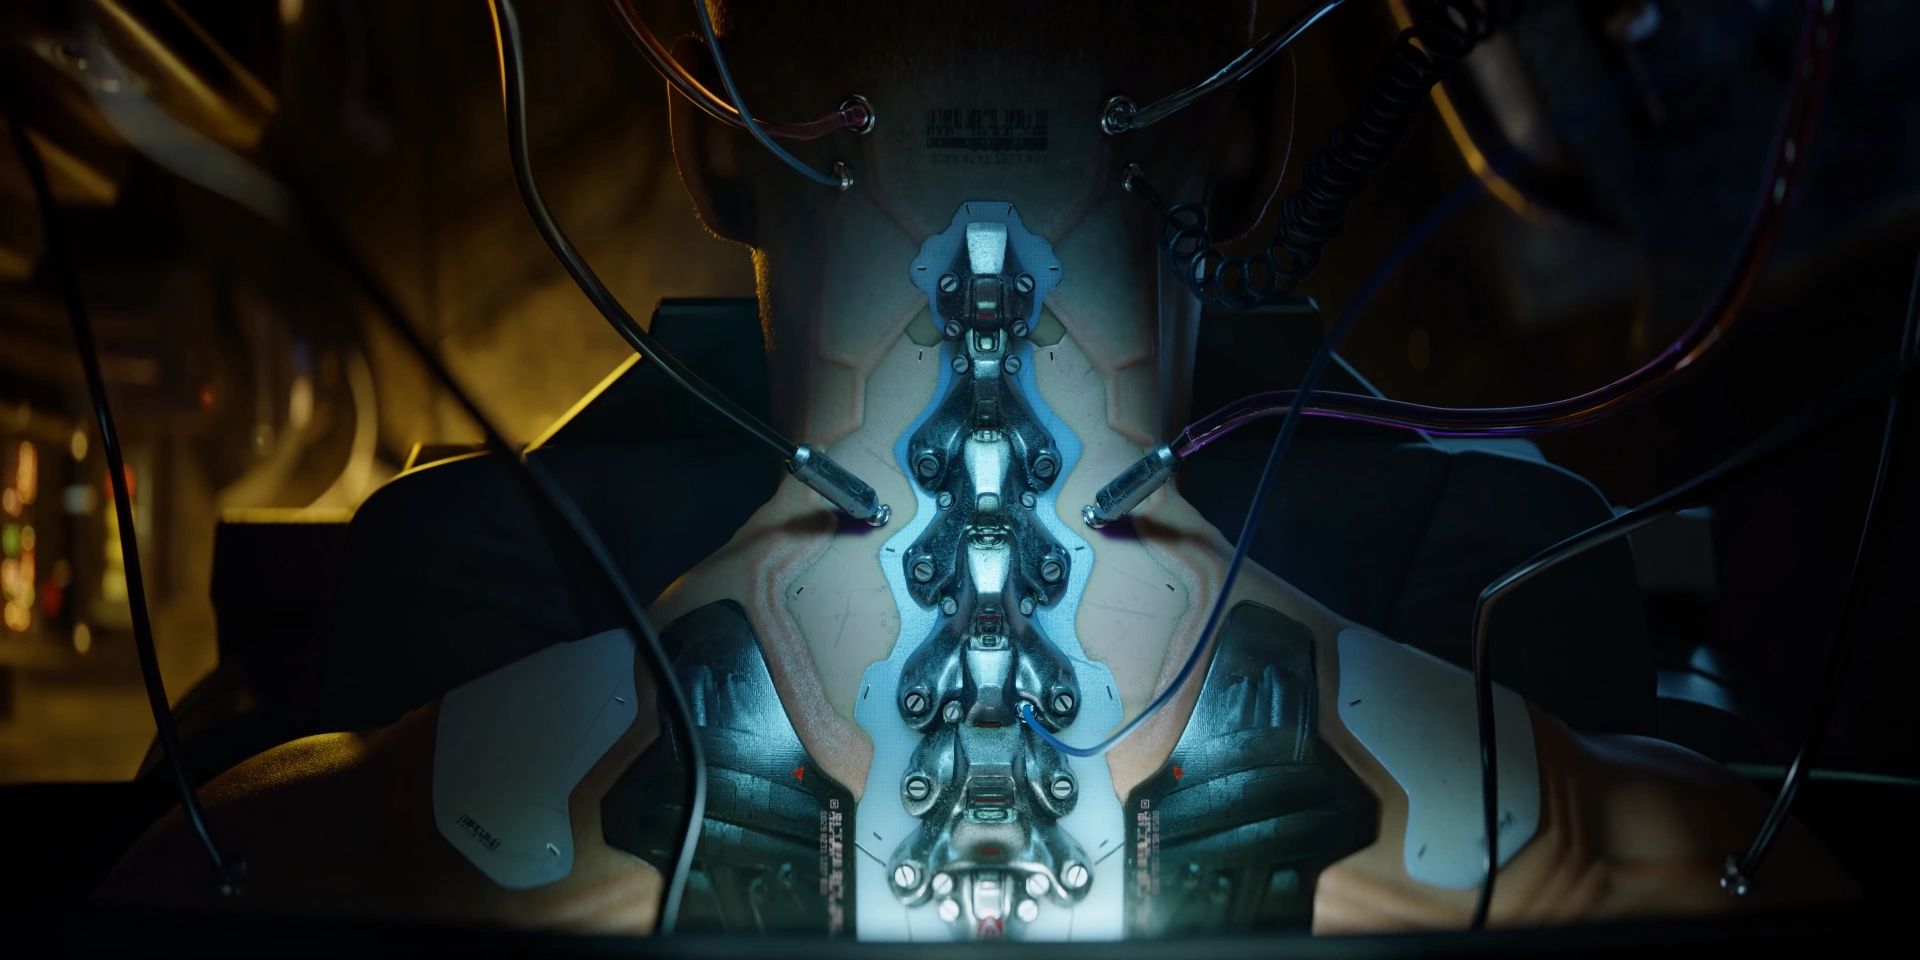 Spinal cybernetics getting implanted on a Cyberpunk character.